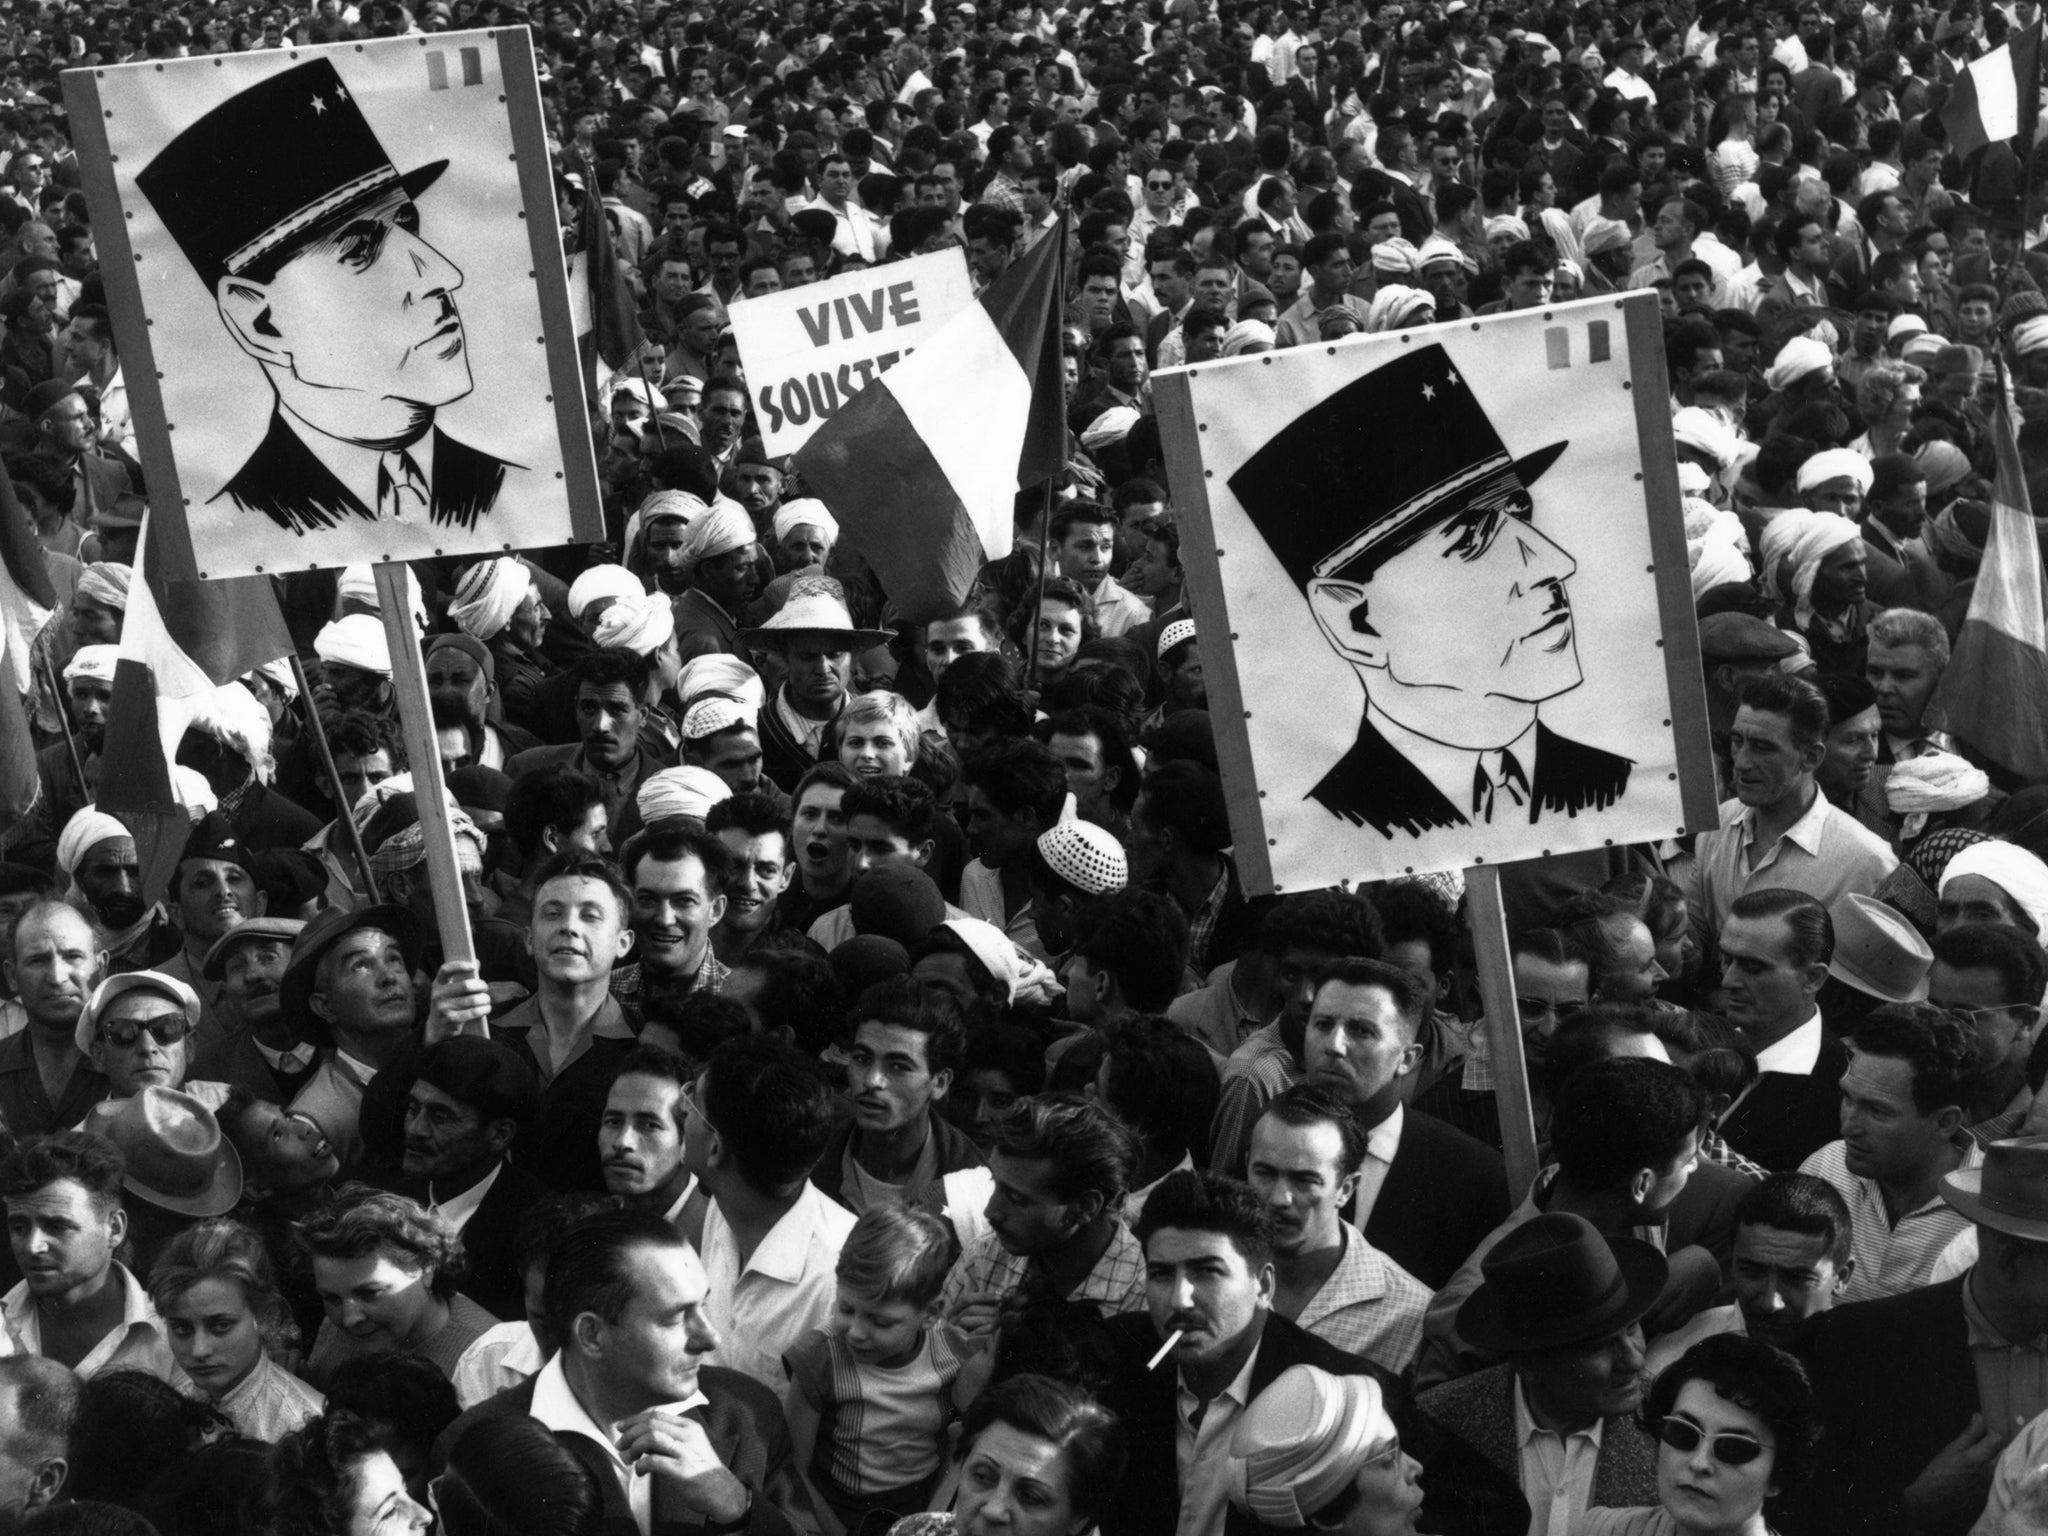 A crowd of Algerian demonstrators outside Government House, carrying Charles de Gaulle posters during the Algerian war of independence in 1985